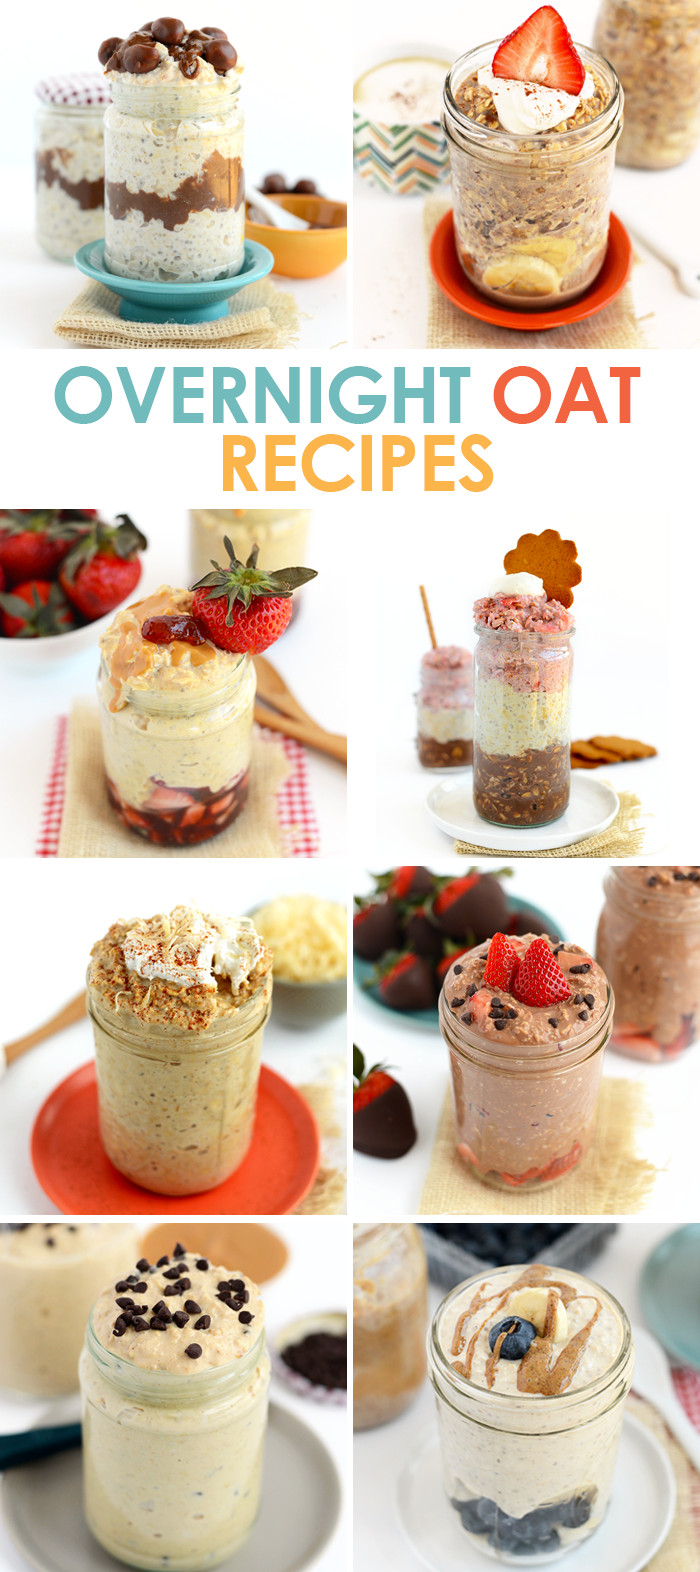 Overnight Oats Healthy
 8 Ways to Eat Overnight Oats Fit Foo Finds